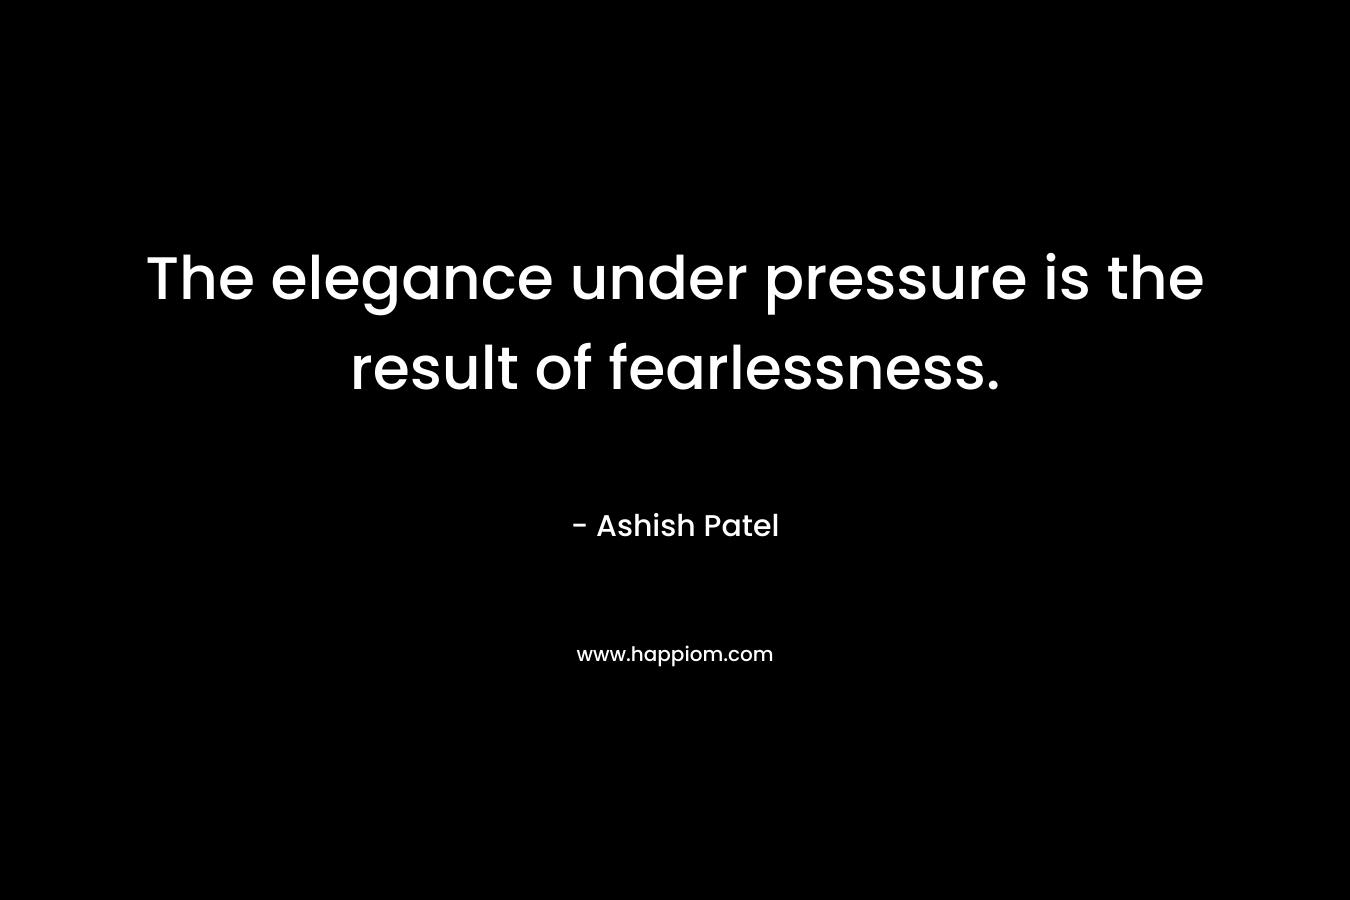 The elegance under pressure is the result of fearlessness. – Ashish Patel